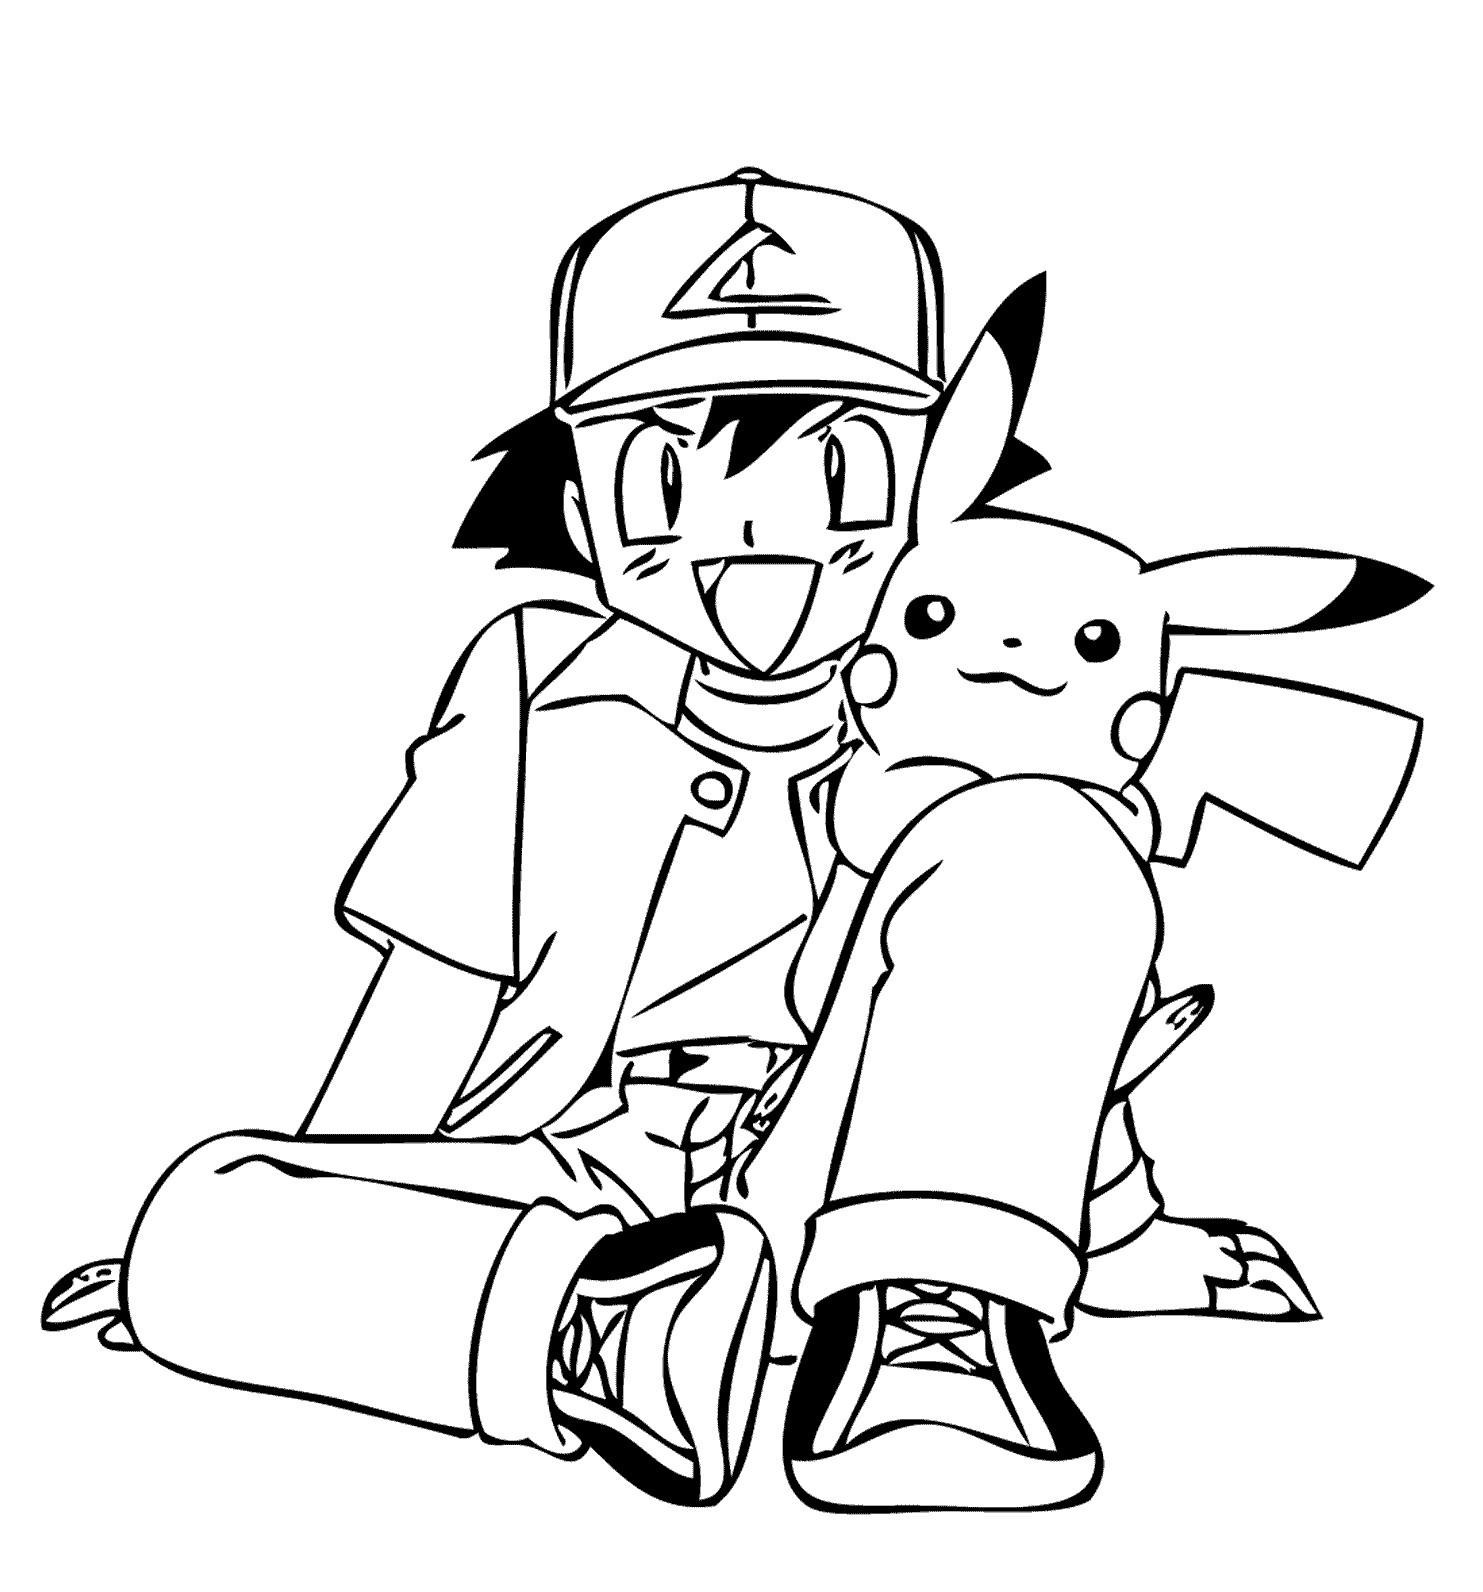 Boys Adult Coloring Book Pages
 Friends from Pokemon anime coloring pages for kids